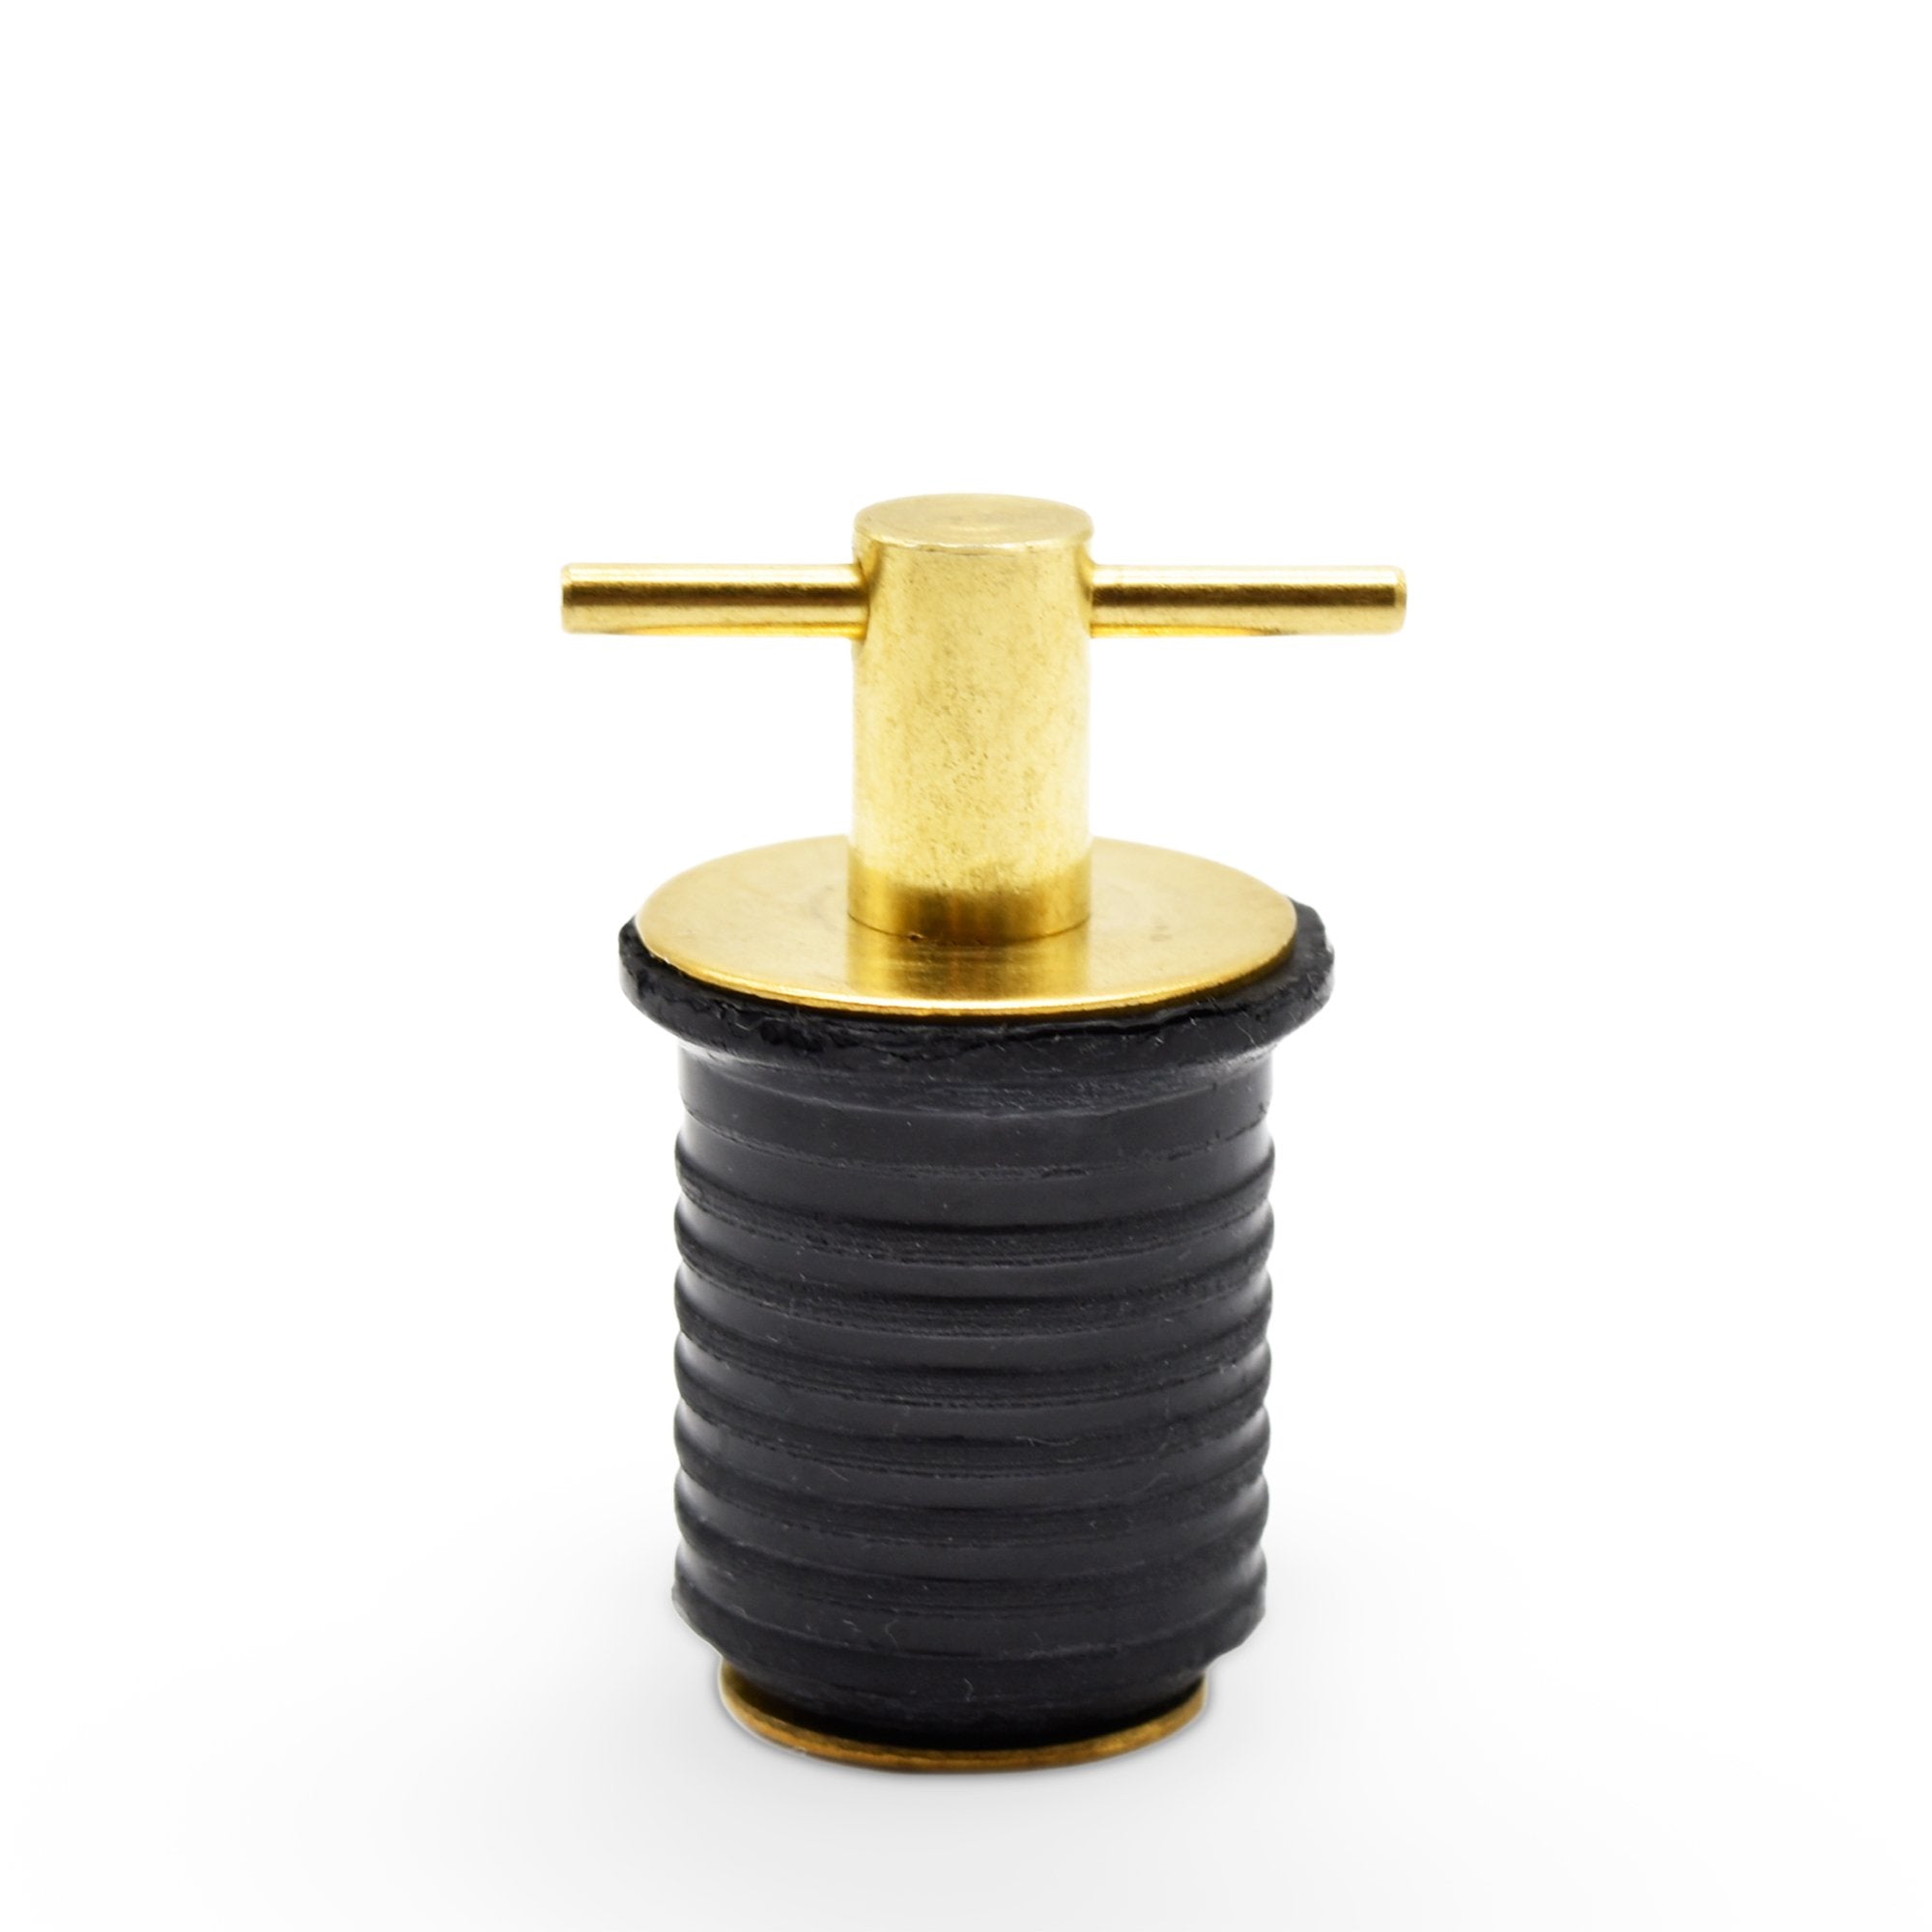 Marine City Brass T-Handle 1 inches or 1-1/4 inches Drain Plug for Boat (1 Inches Drain Plug)